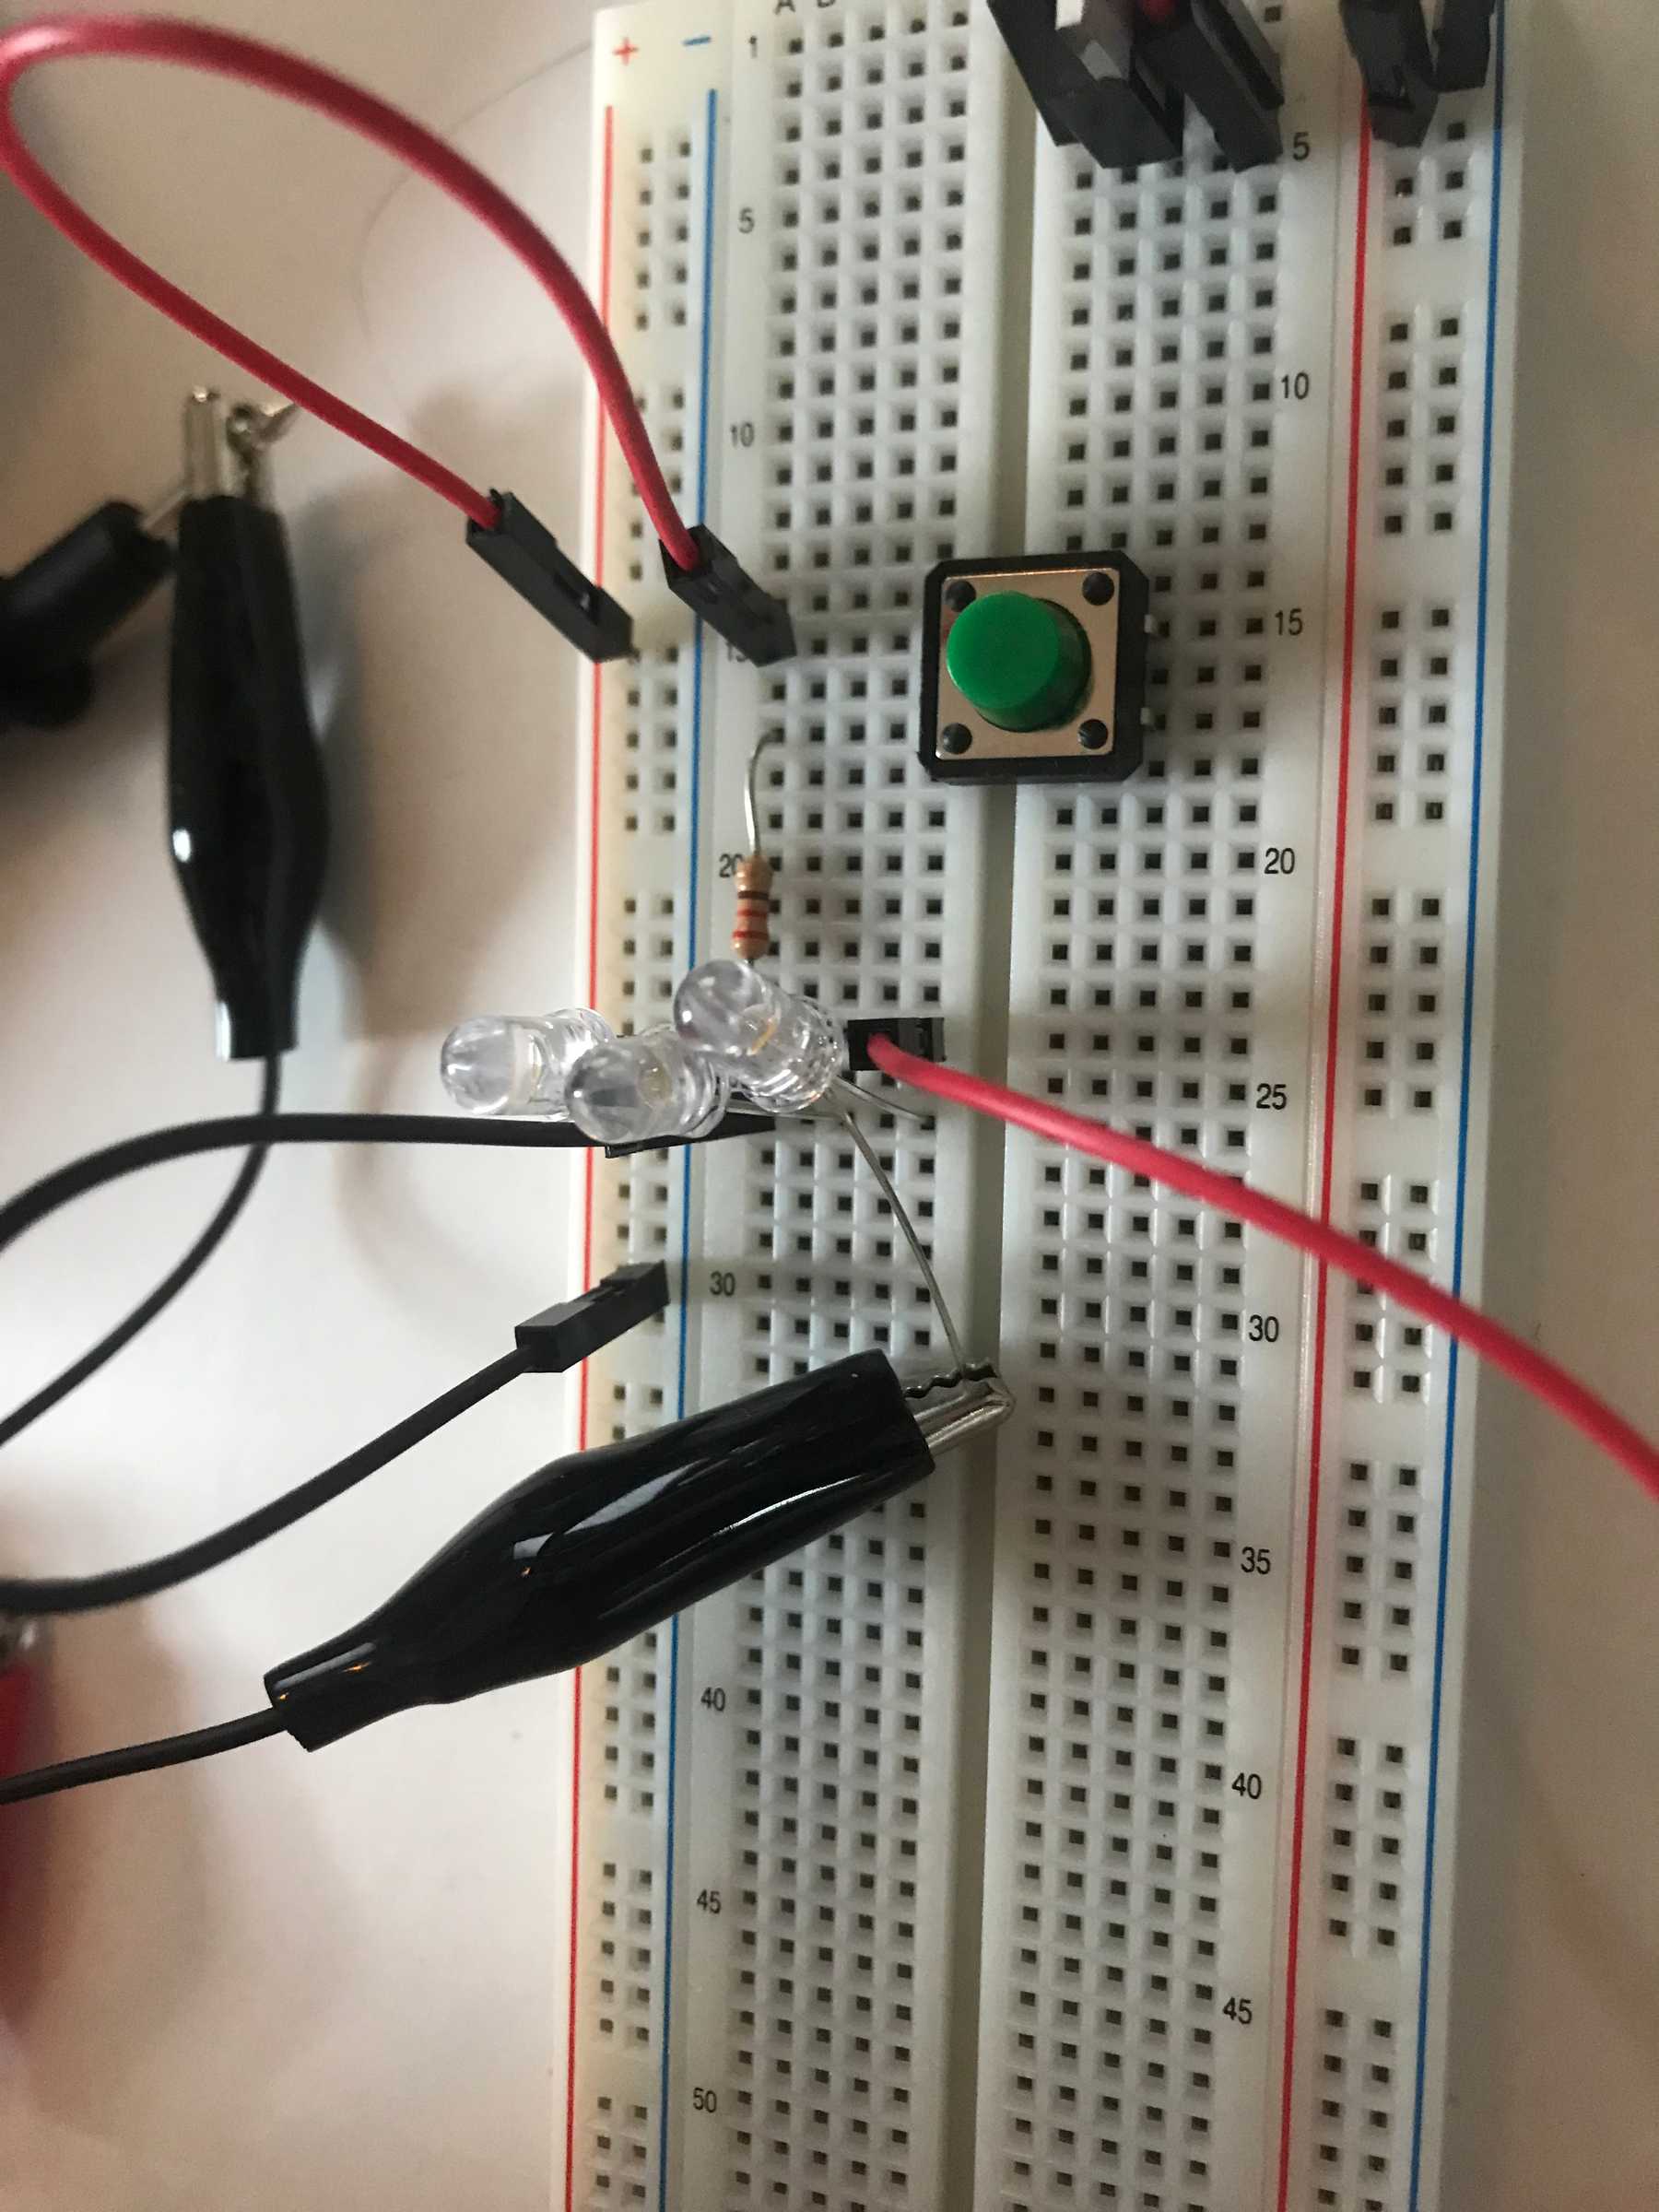 Using the multimeter in series with the LED